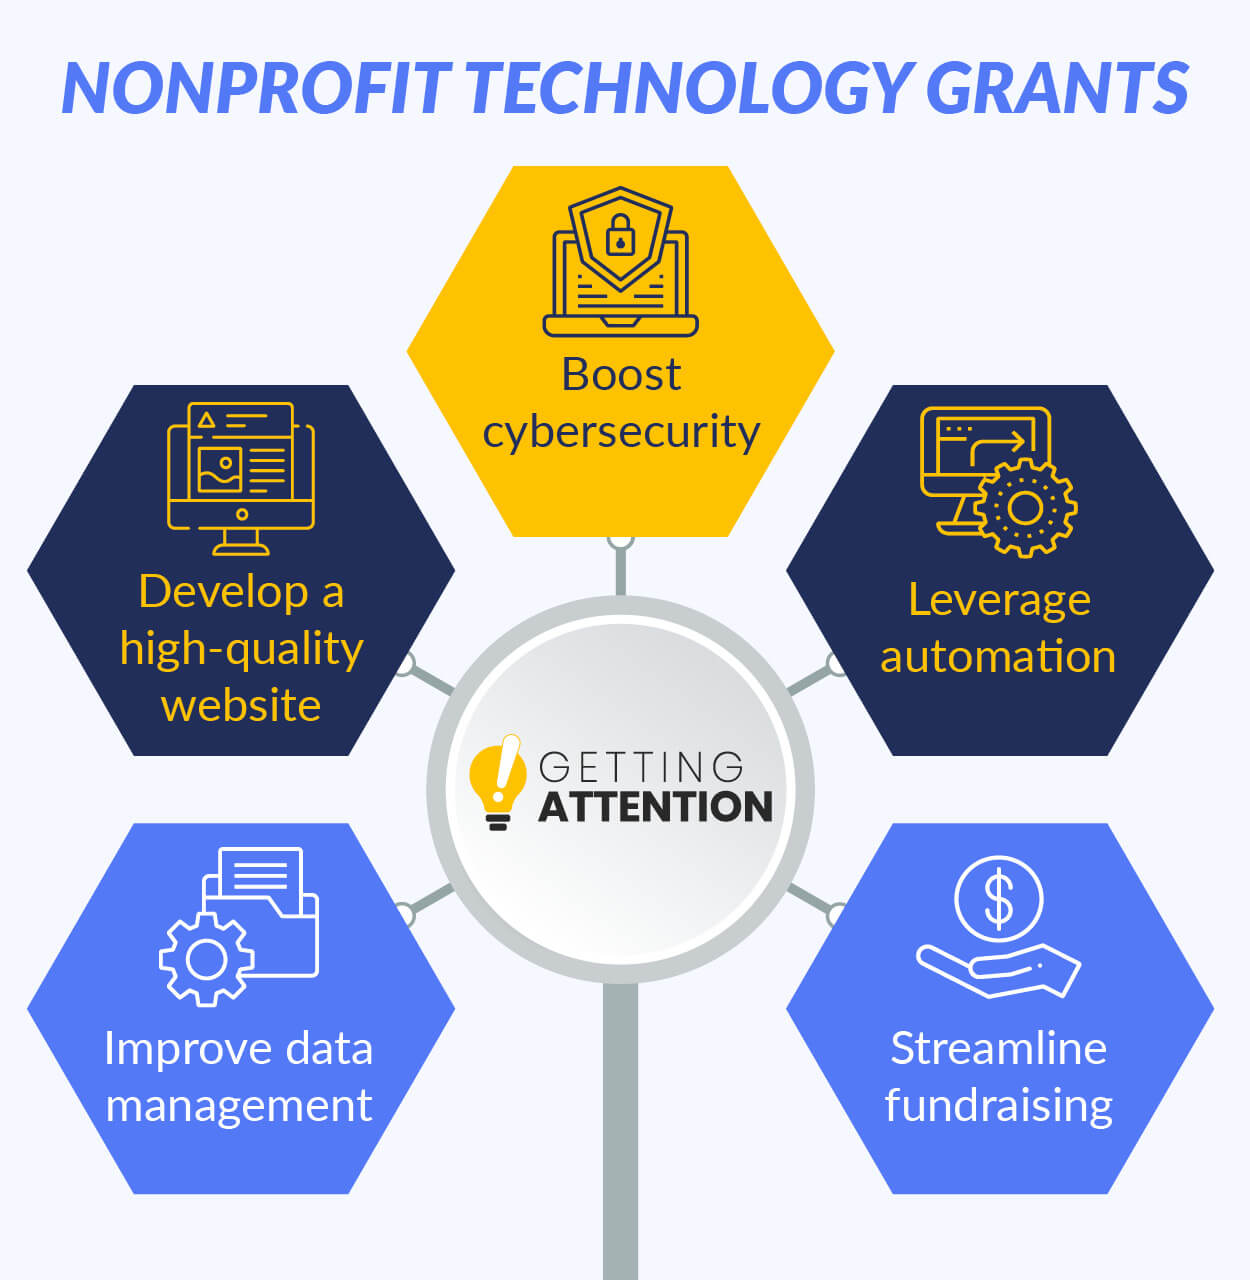 Technology grants for nonprofits can provide support in many ways, including the five ways detailed below.